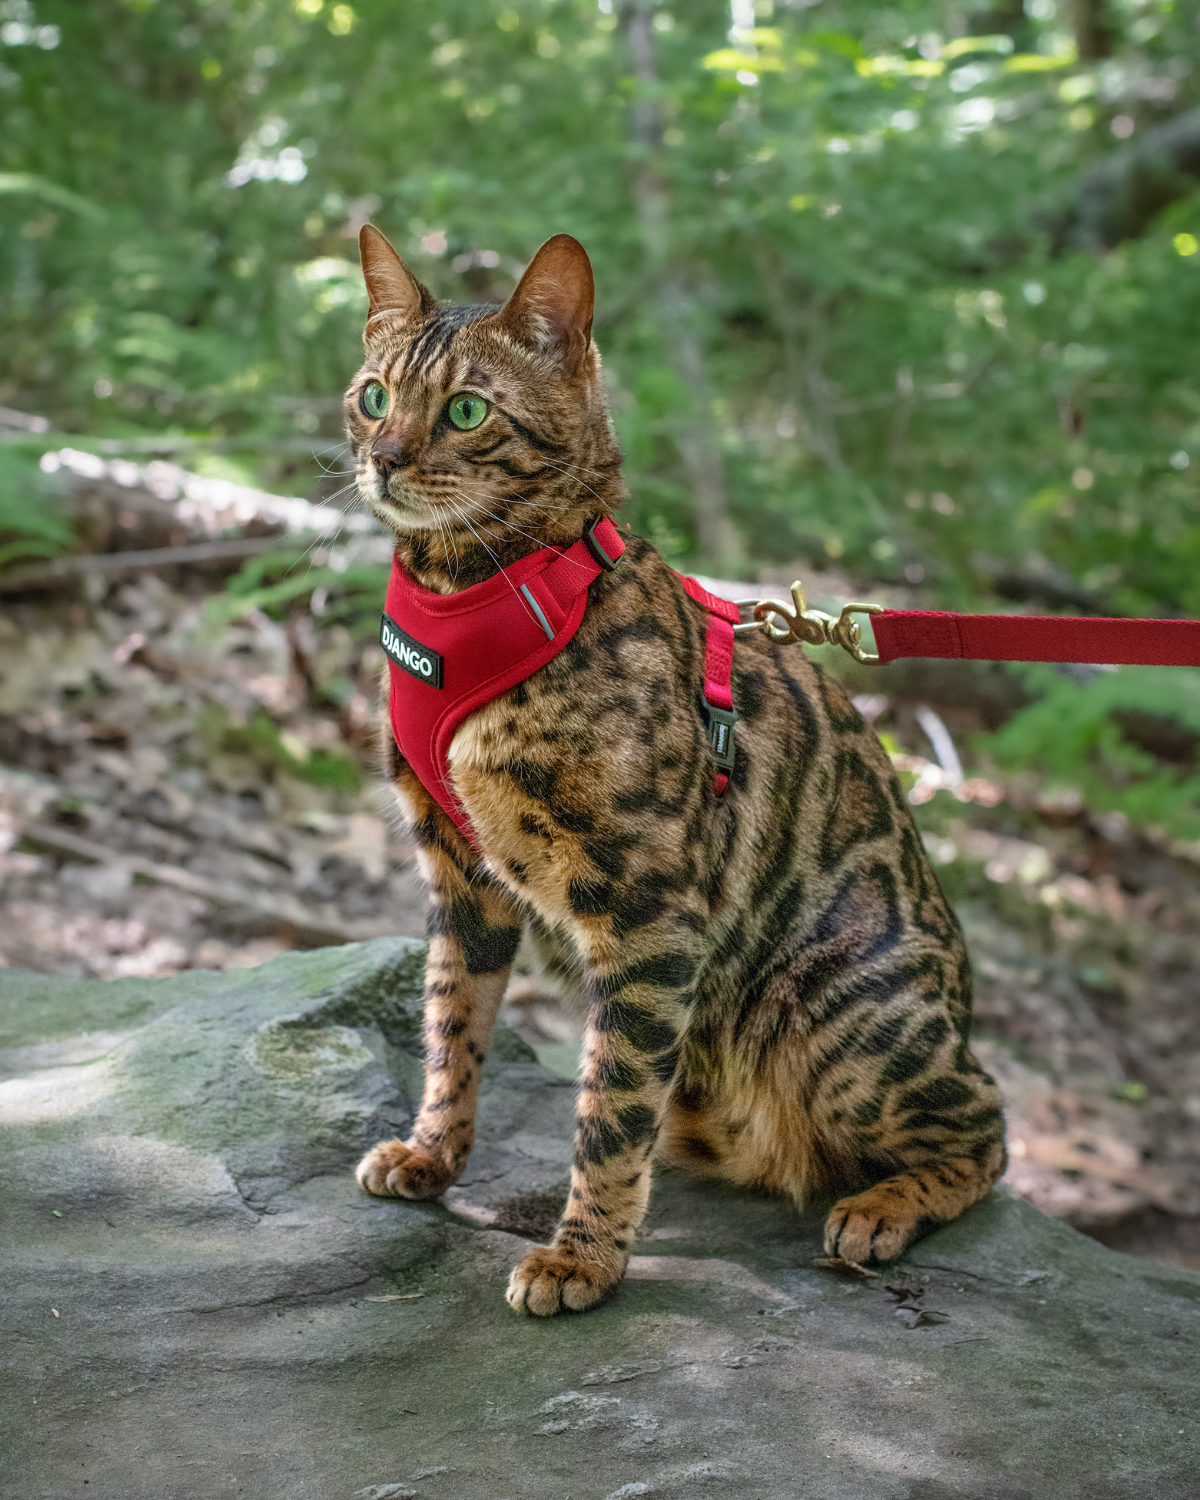 Loki is a Bengal cat and adventure cat and wears size small in DJANGO Adventure Cat Harnesses. DJANGO harnesses feature a padded and lightweight body, soft custom webbing for max comfort, a breathable sport mesh lining, reflective piping, and a beautiful solid cast brass D-ring. - djangobrand.com